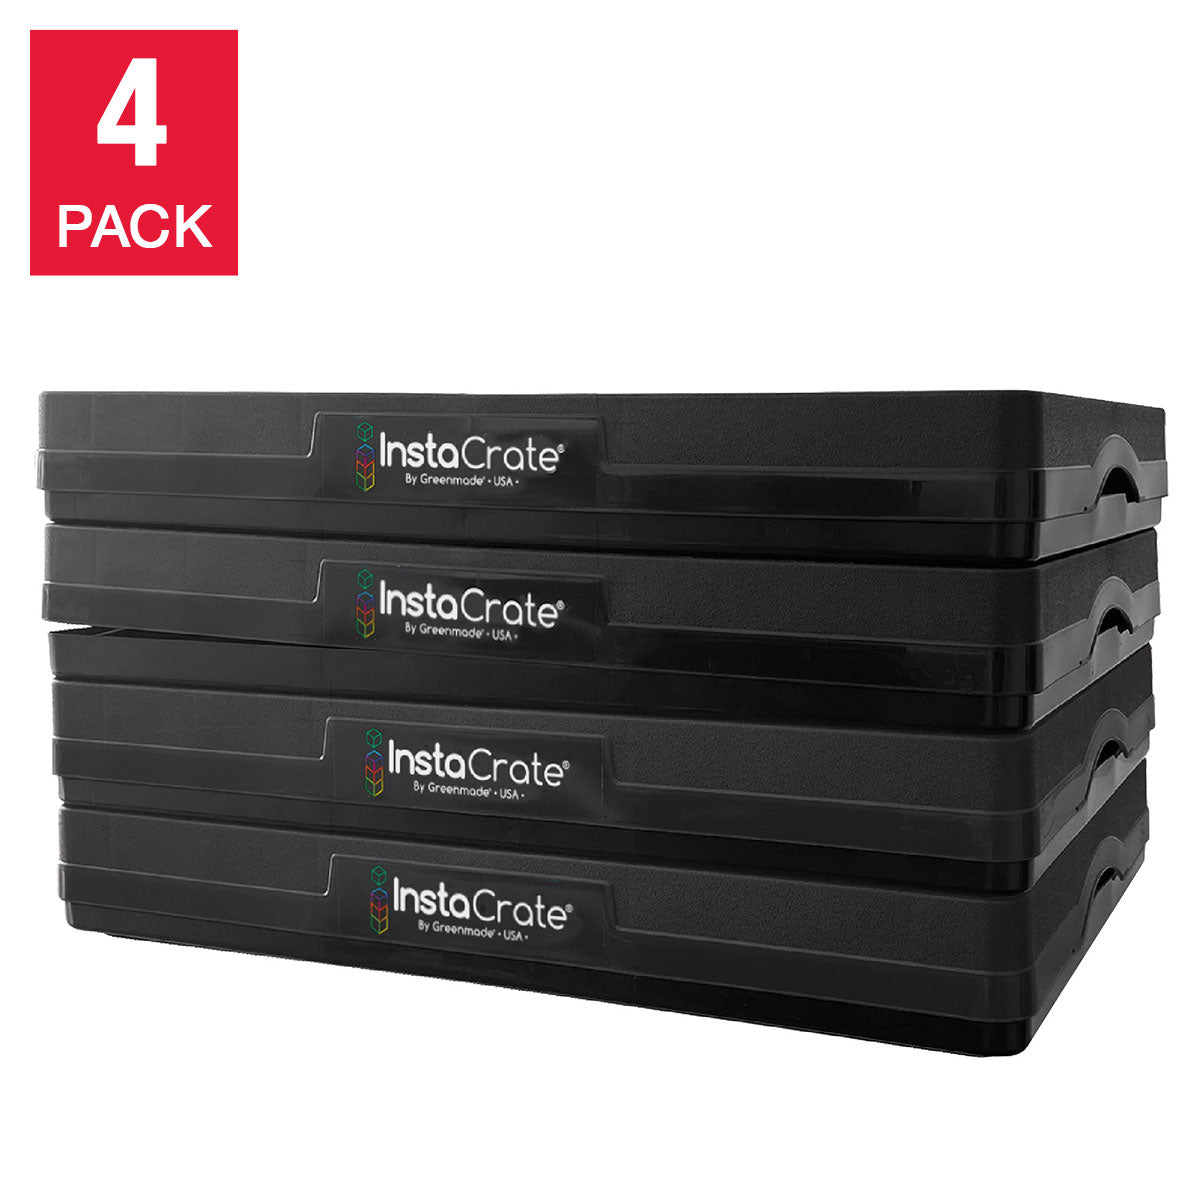 Instacrate Collapsible Storage Bin, 4-Pack